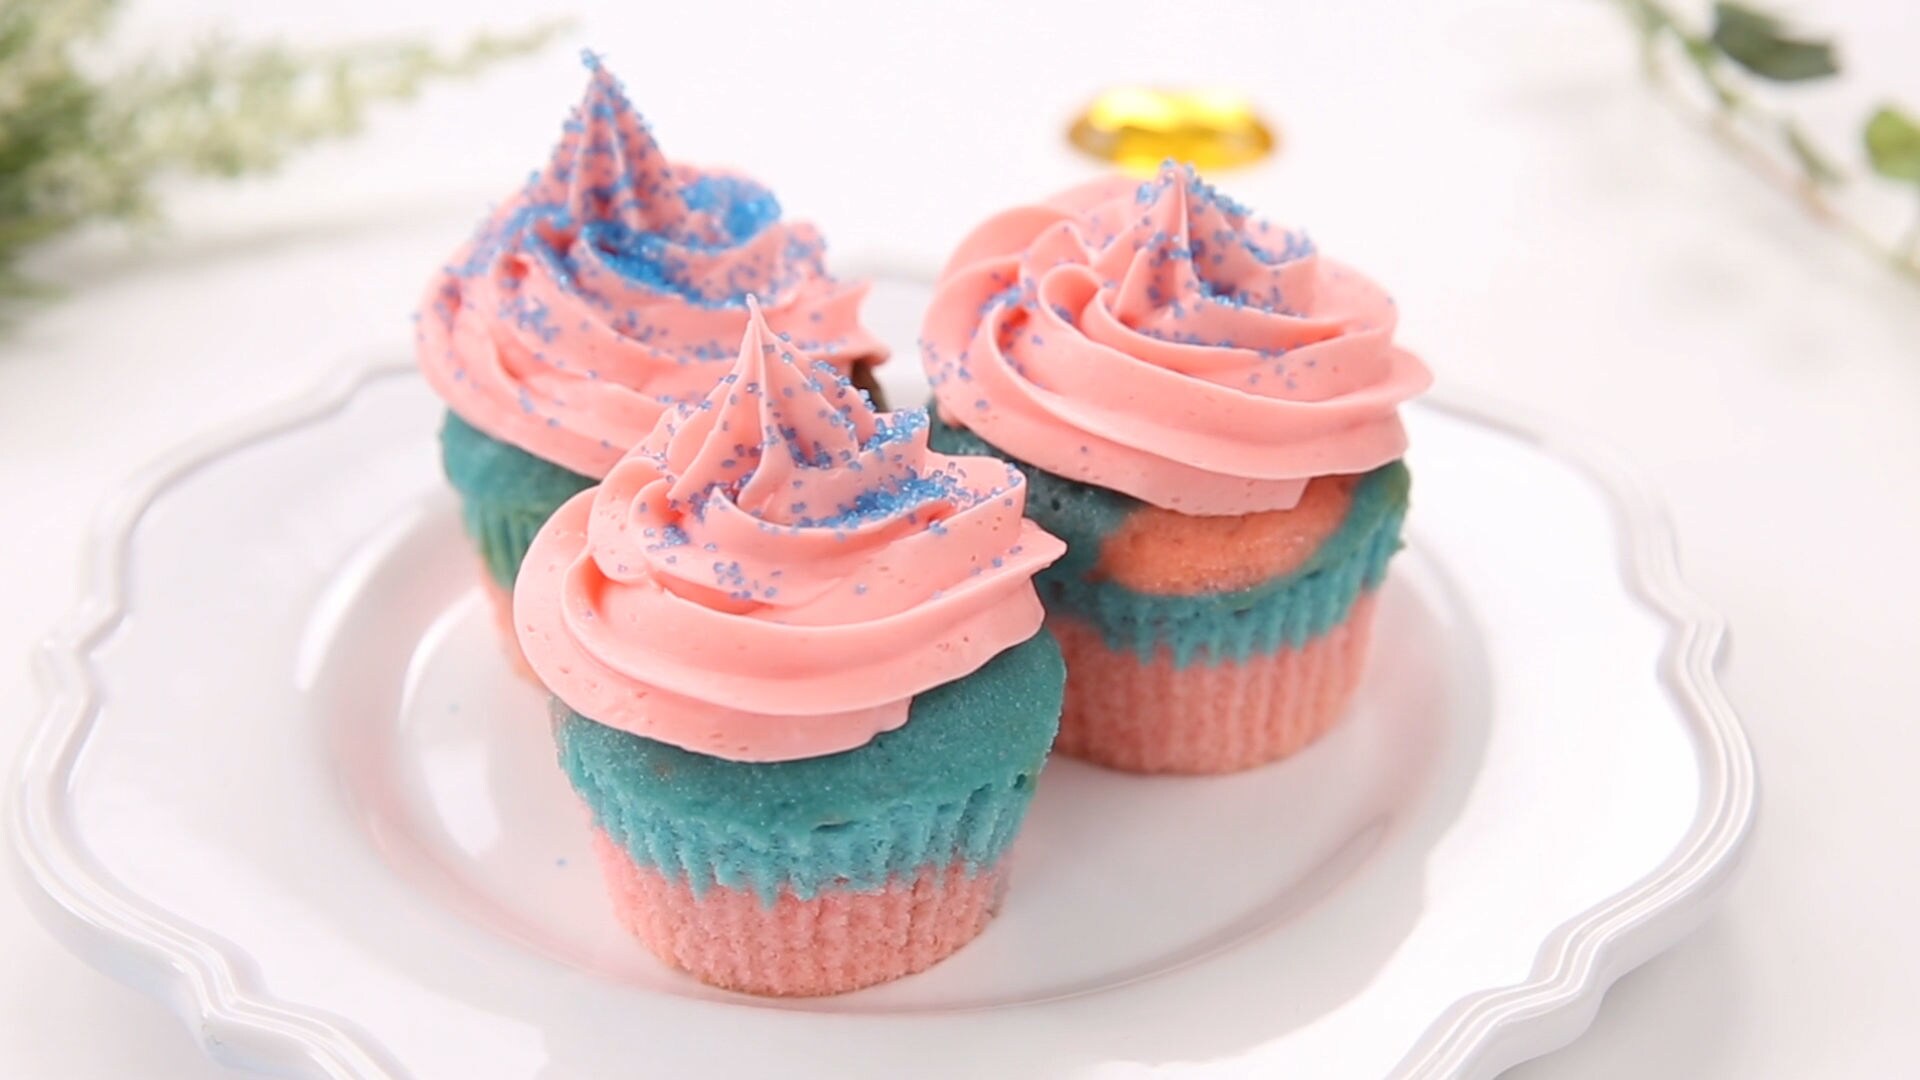 Aurora's Blue and Pink Cupcakes | Dishes by Disney